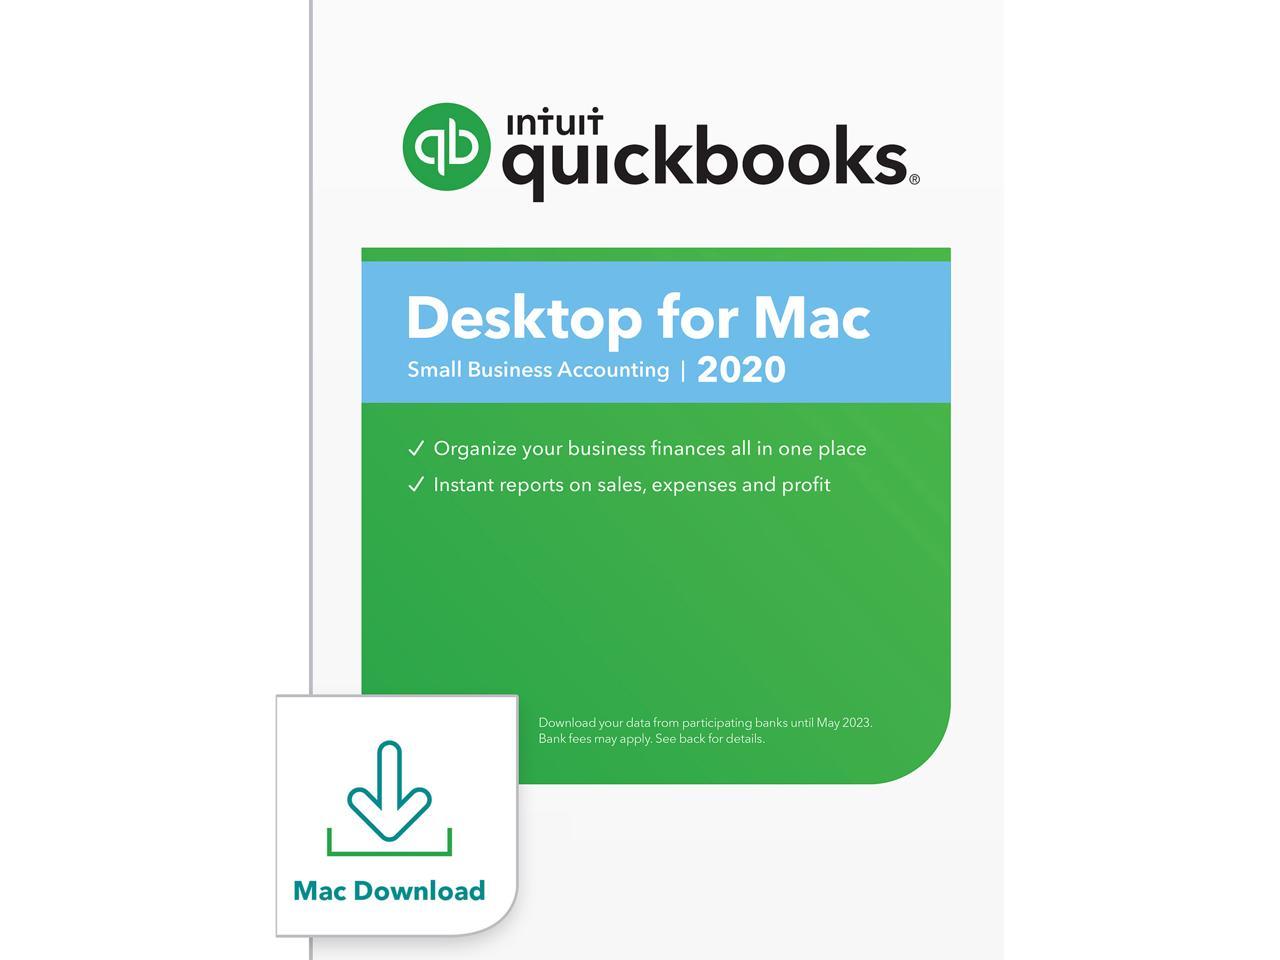 intuit quickbooks for mac review